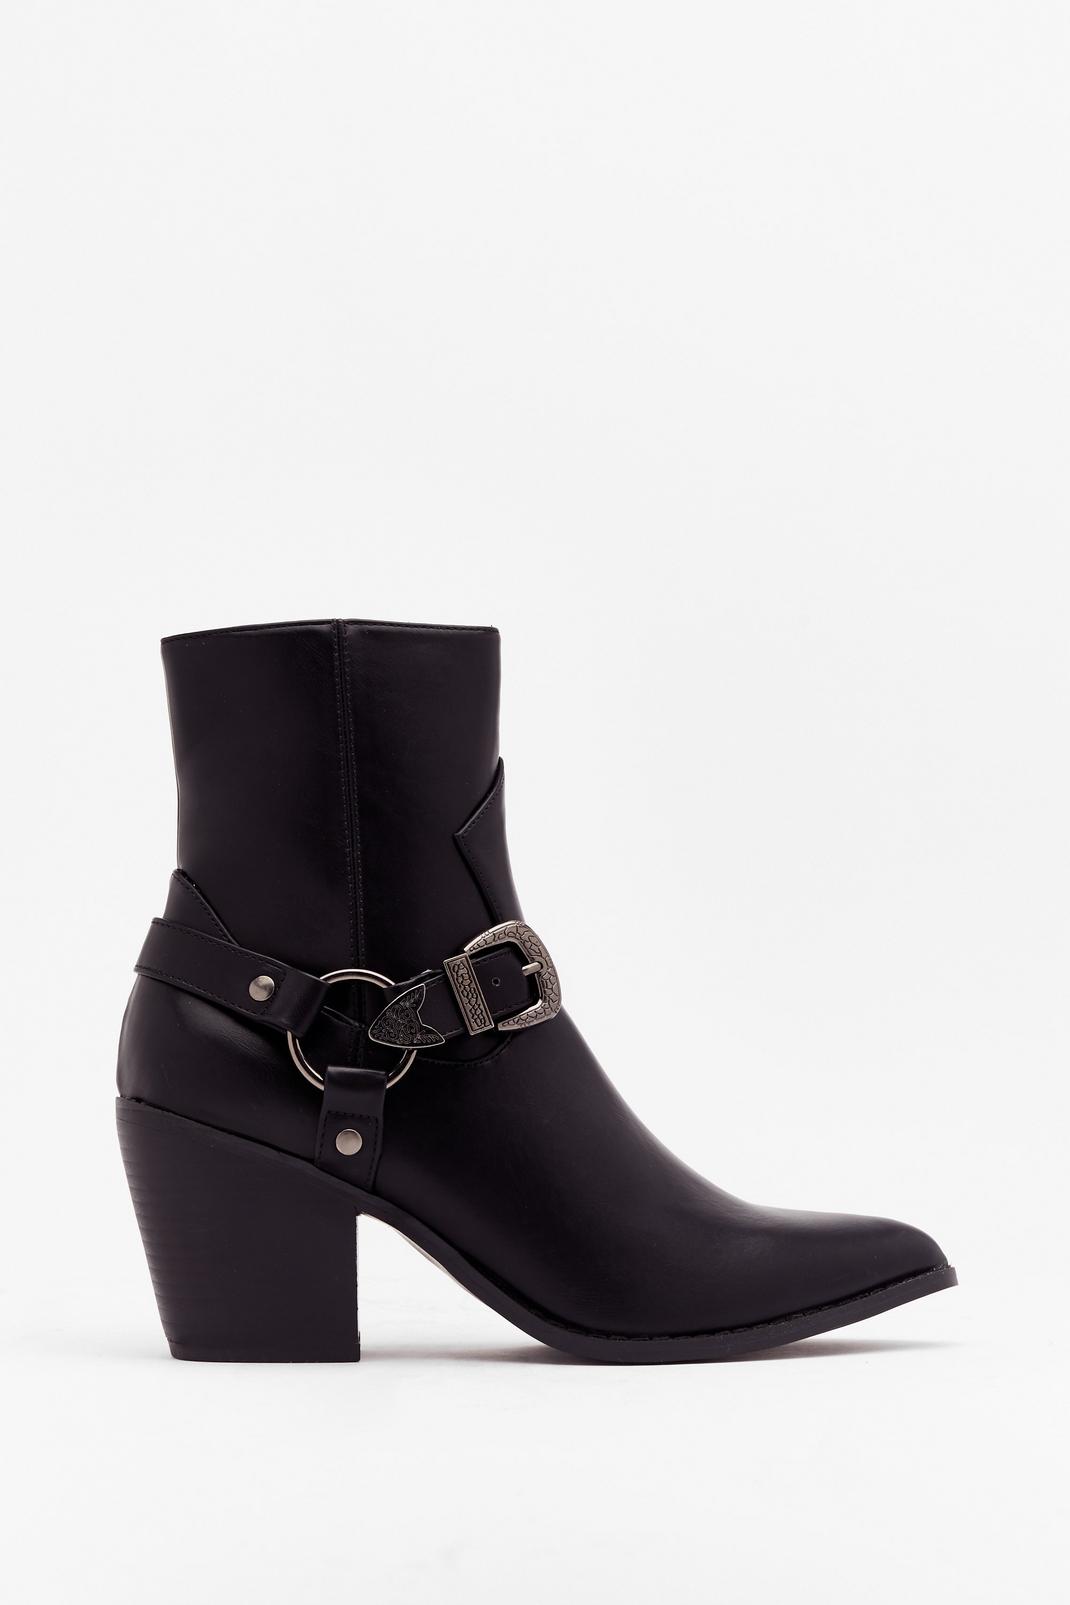 Baby You're the West Faux Leather Boots | Nasty Gal